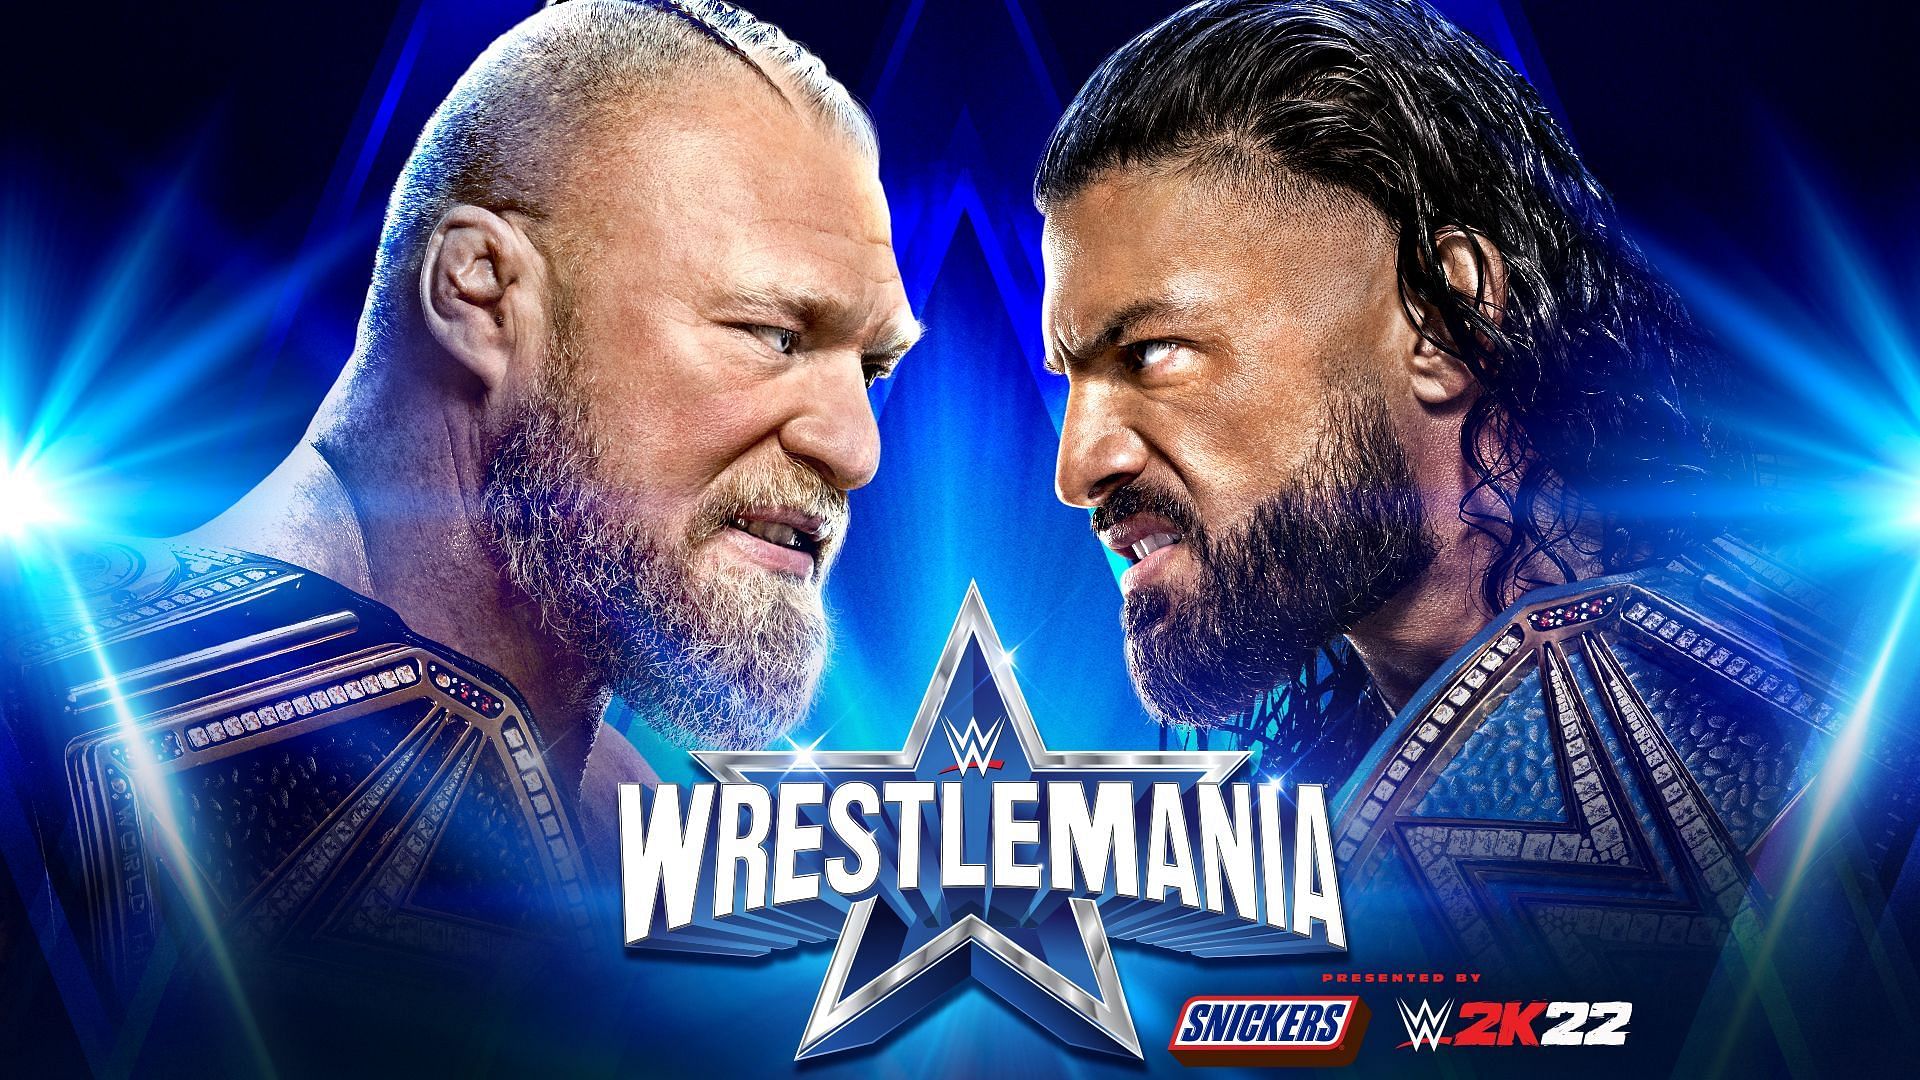 Lesnar and Reigns will battle to crown a new unified champion